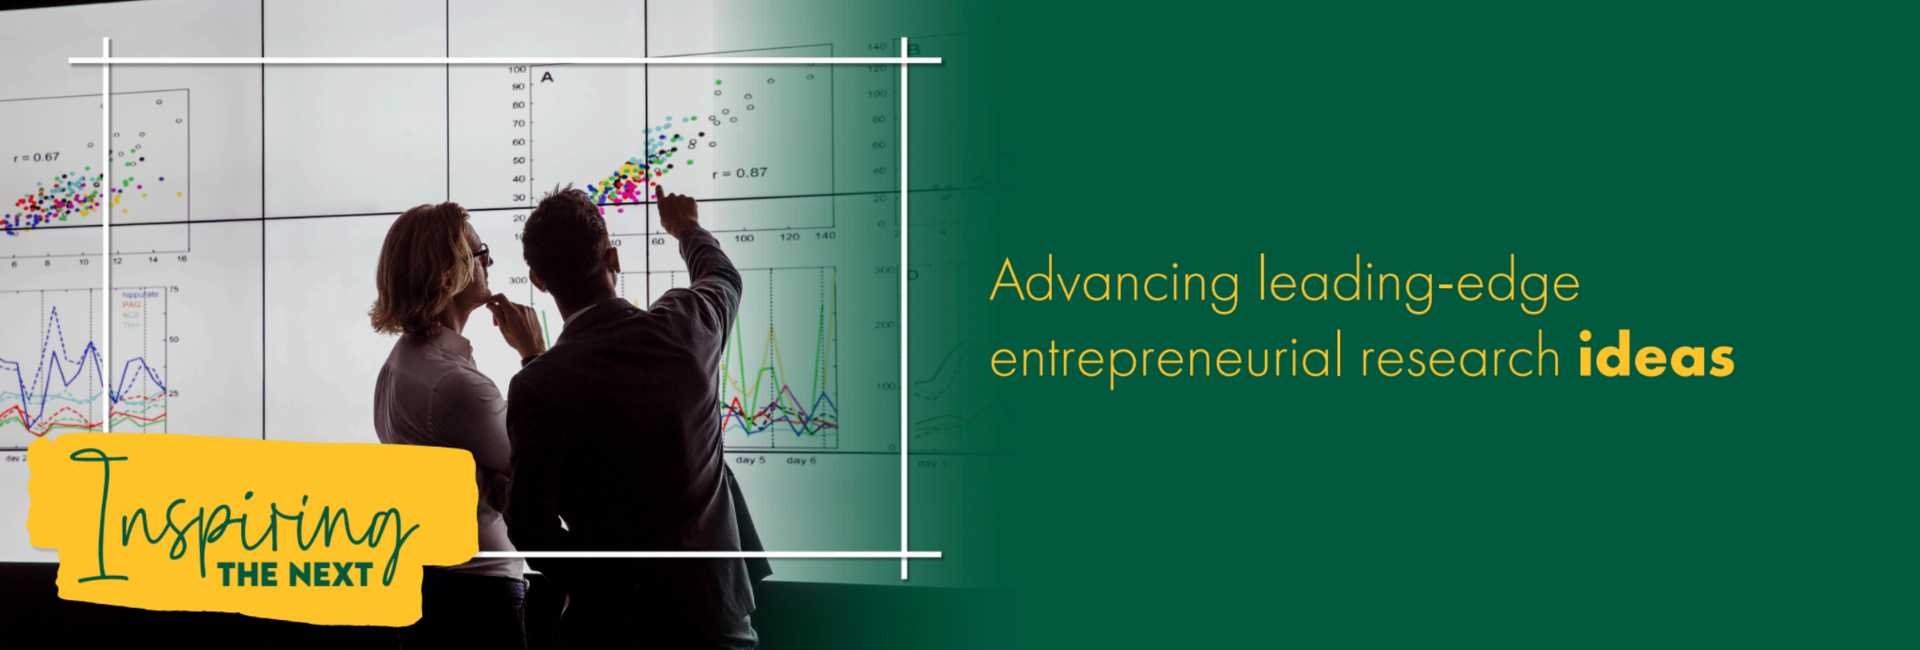 Advancing leading-edge entrepreneurial research ideas